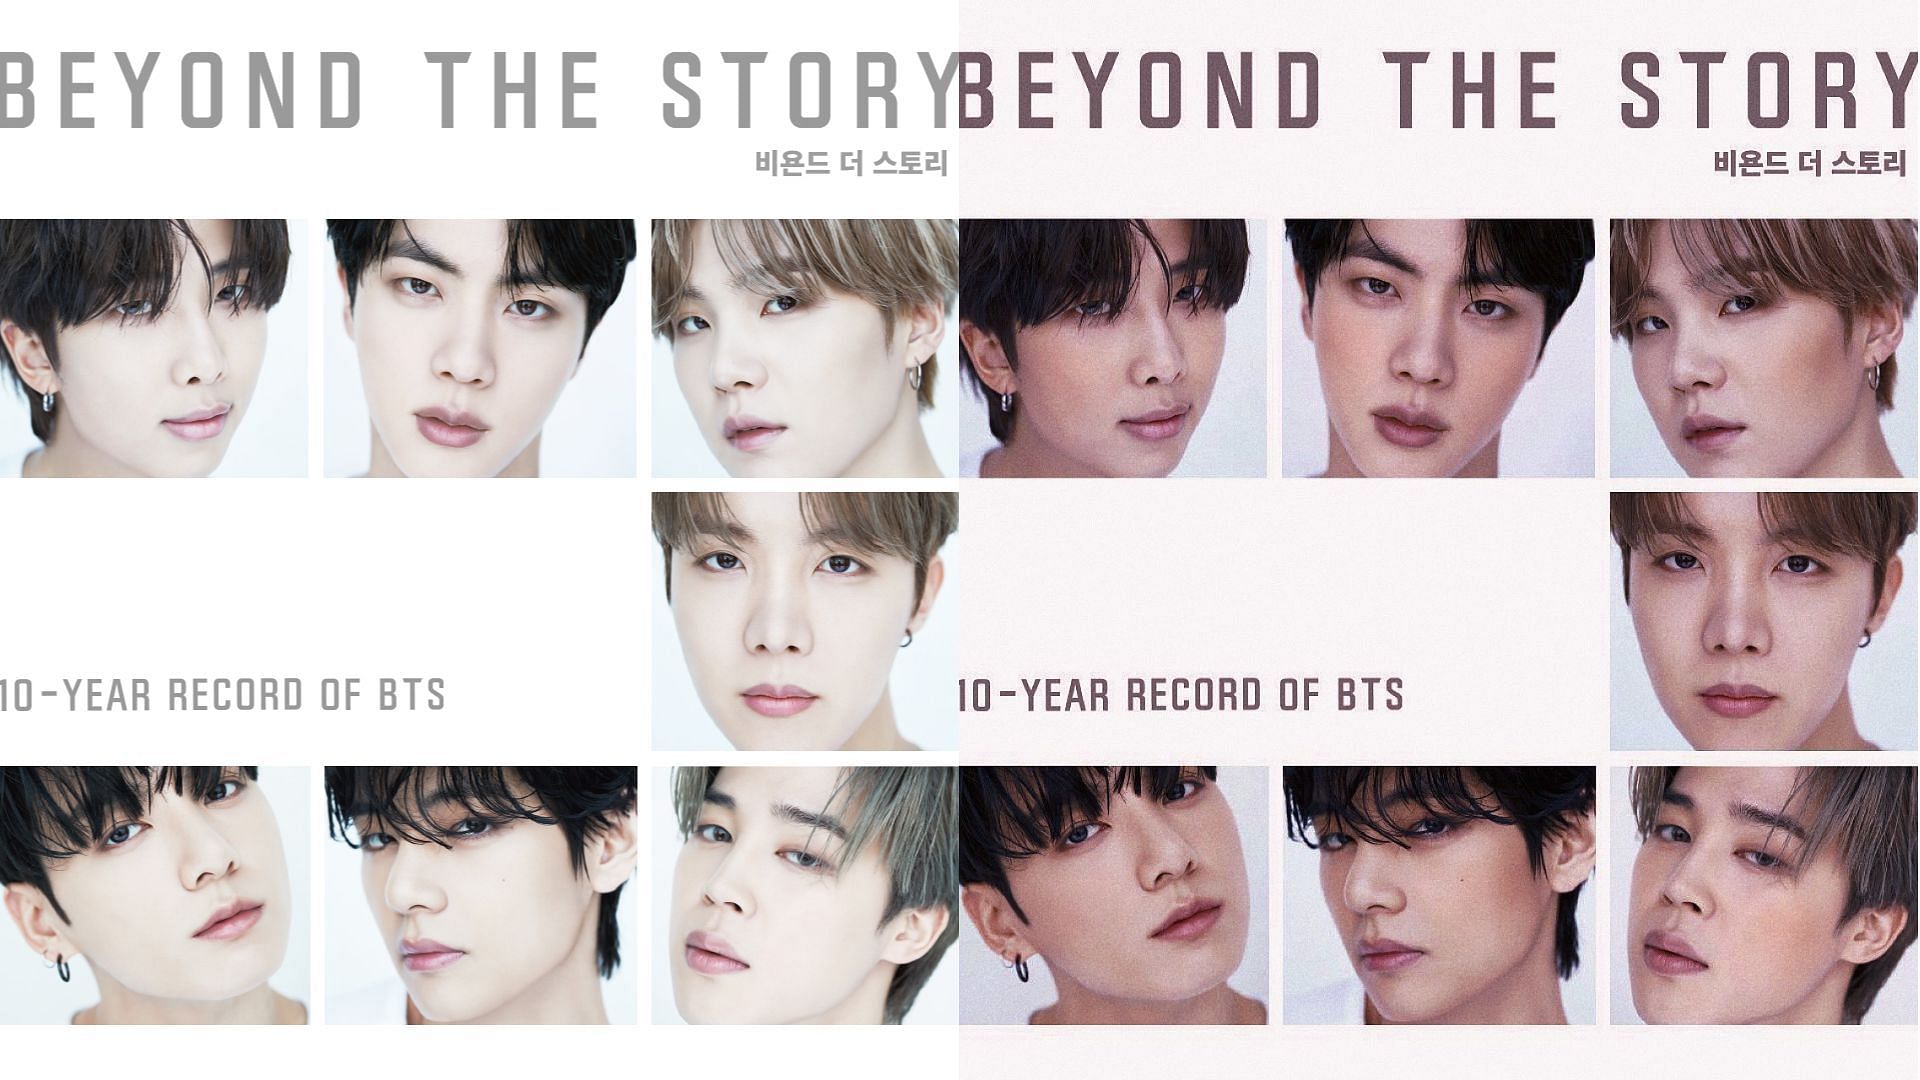 We're constantly being robbed”: Fans vehemently criticize HYBE for whitewashing BTS in the Beyond the Story book